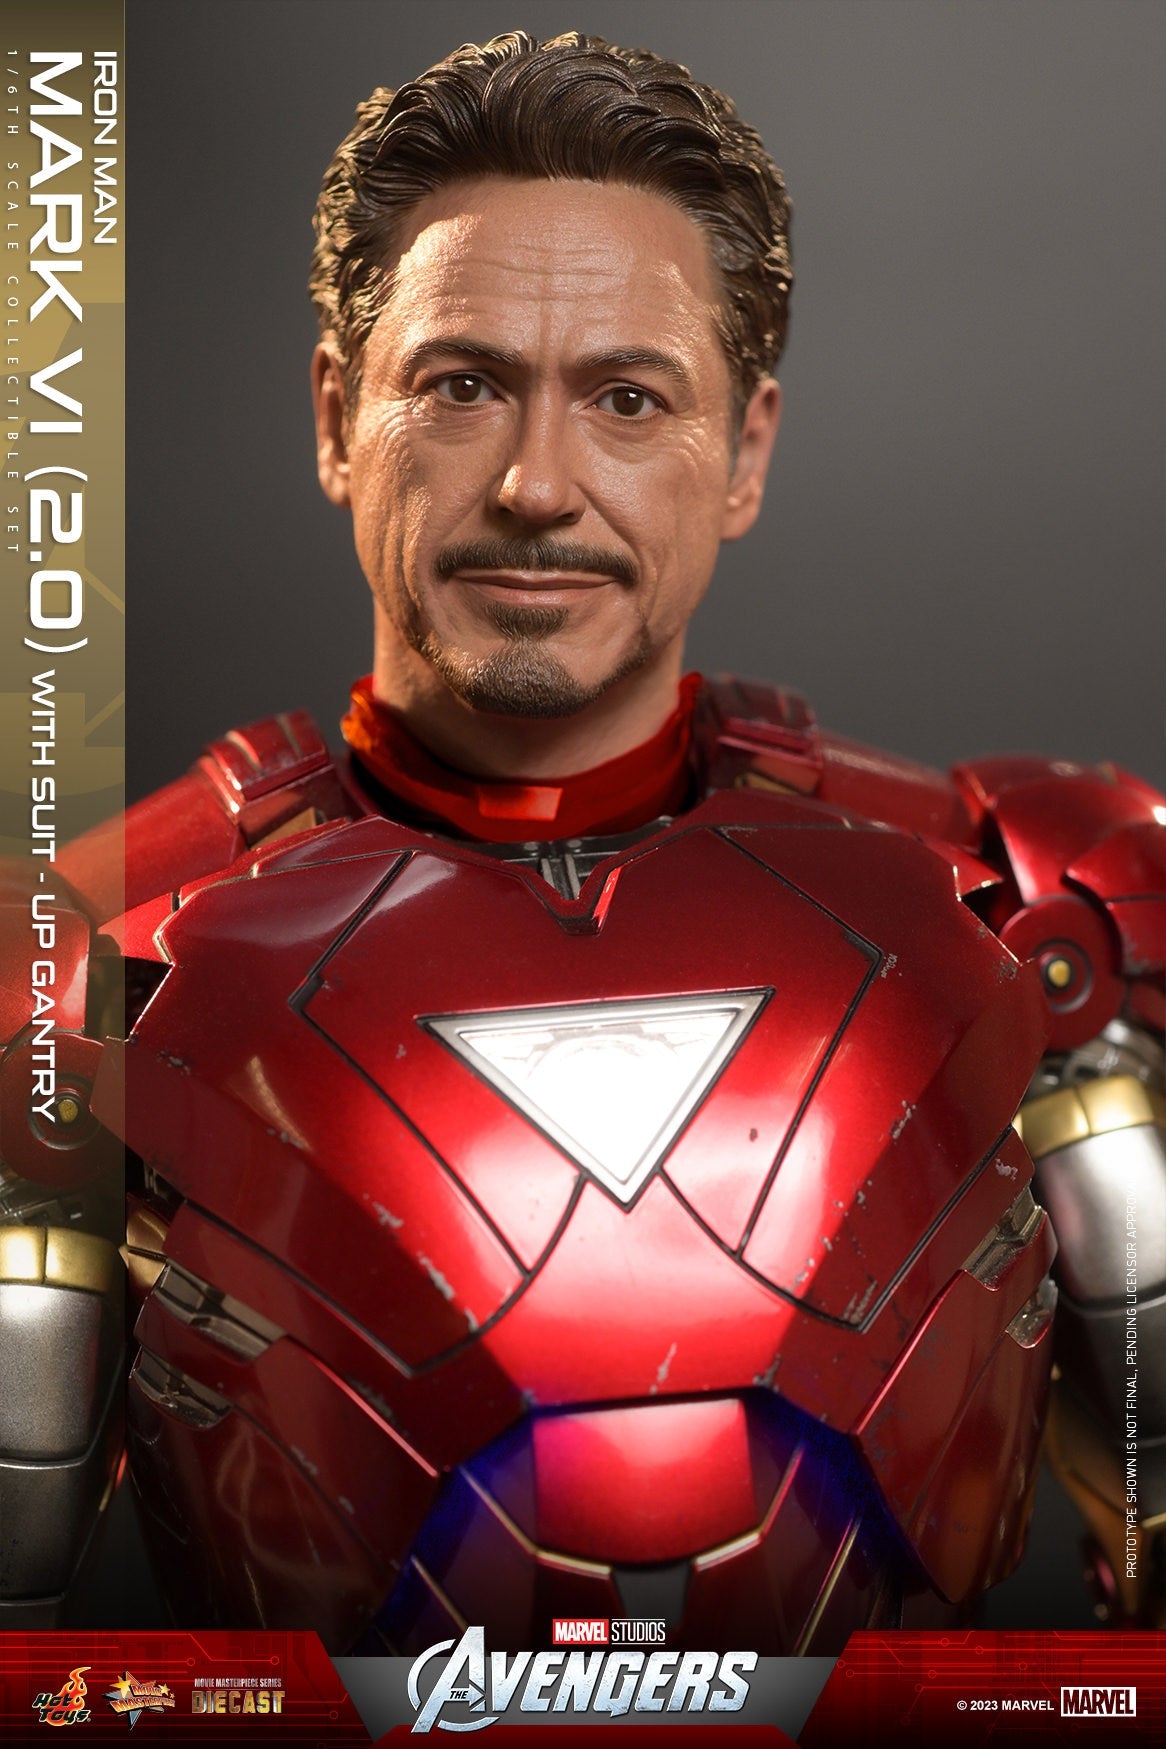 Iron Man: Mark VI (2.0): With Suit Up Gantry: Marvel: MMS688D53 Hot Toys